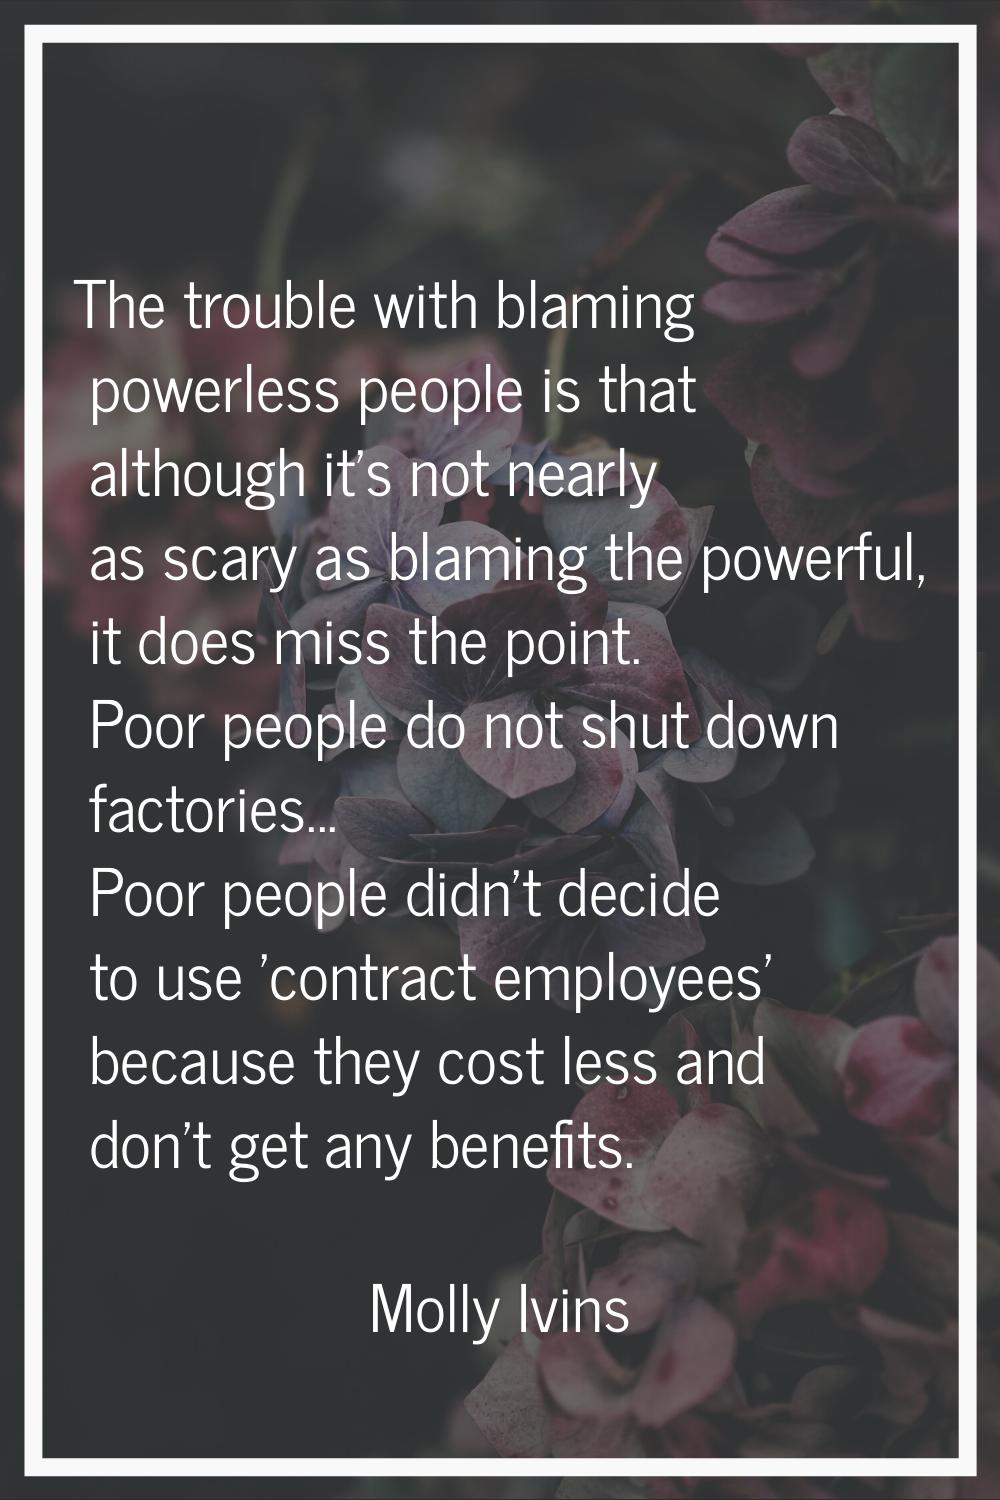 The trouble with blaming powerless people is that although it's not nearly as scary as blaming the 